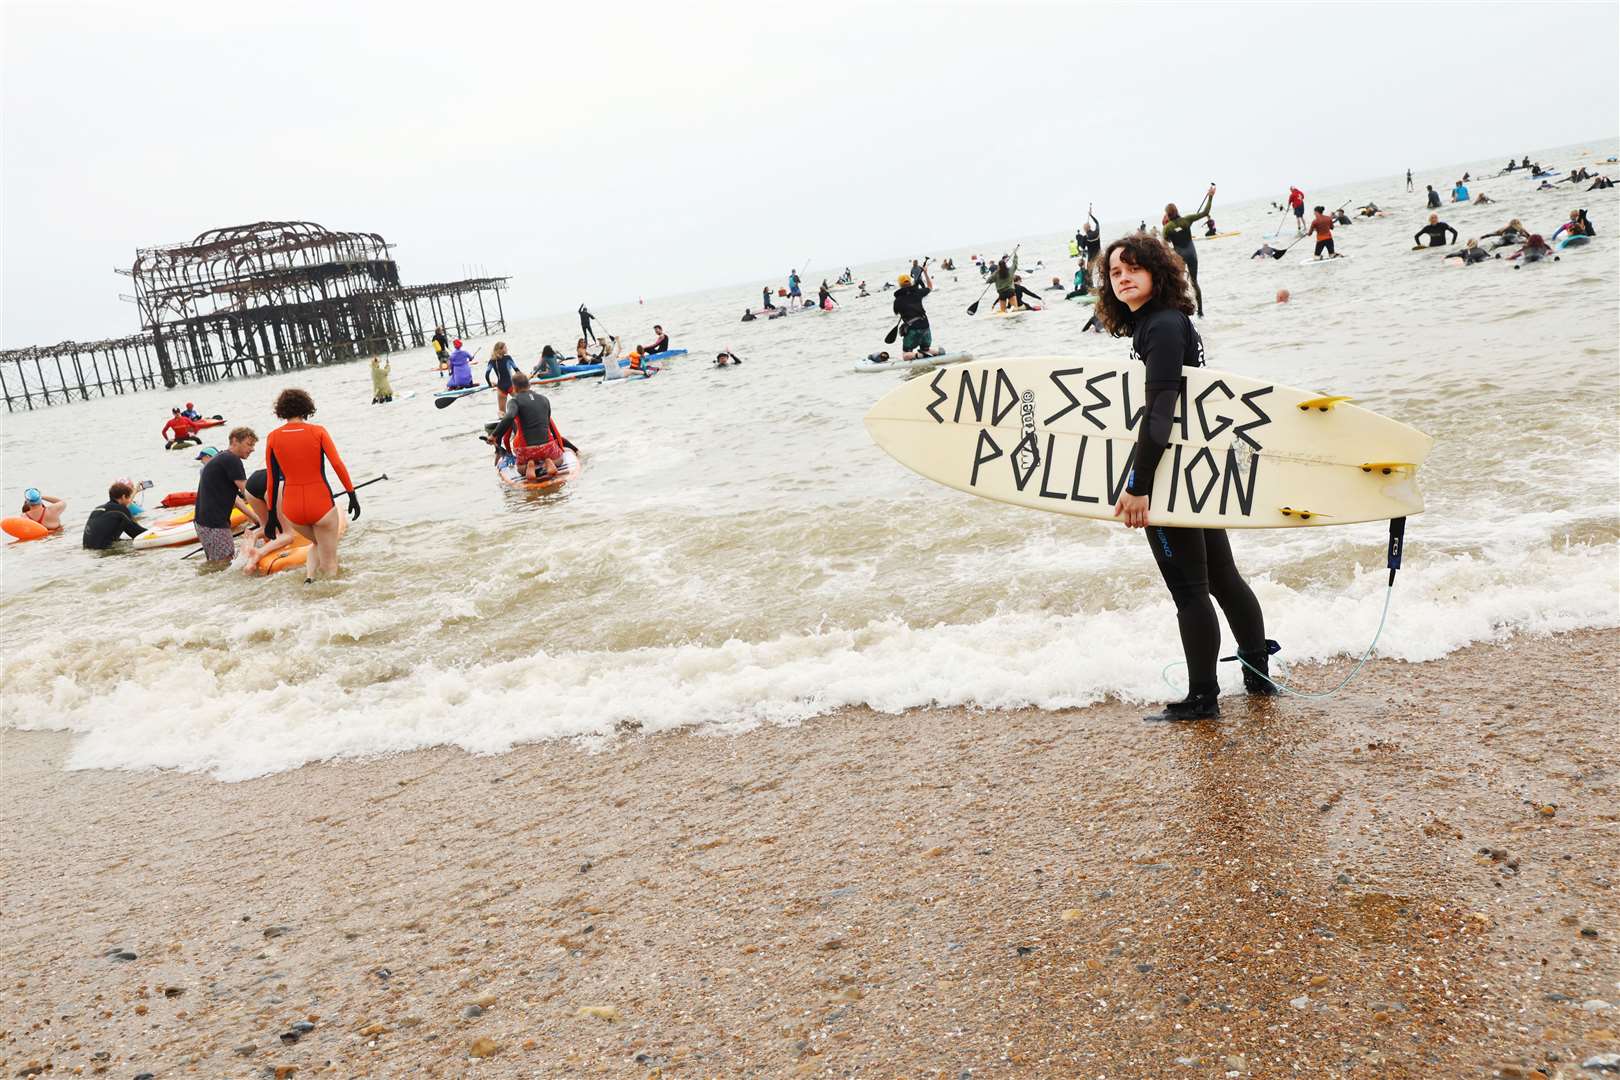 The campaign, co-ordinated by Surfers Against Sewage (SAS), saw protests at more than 30 locations, from West Pier in Brighton to Gyllyngvase Beach in Falmouth (Lia Toby/ PA Media Assignments)